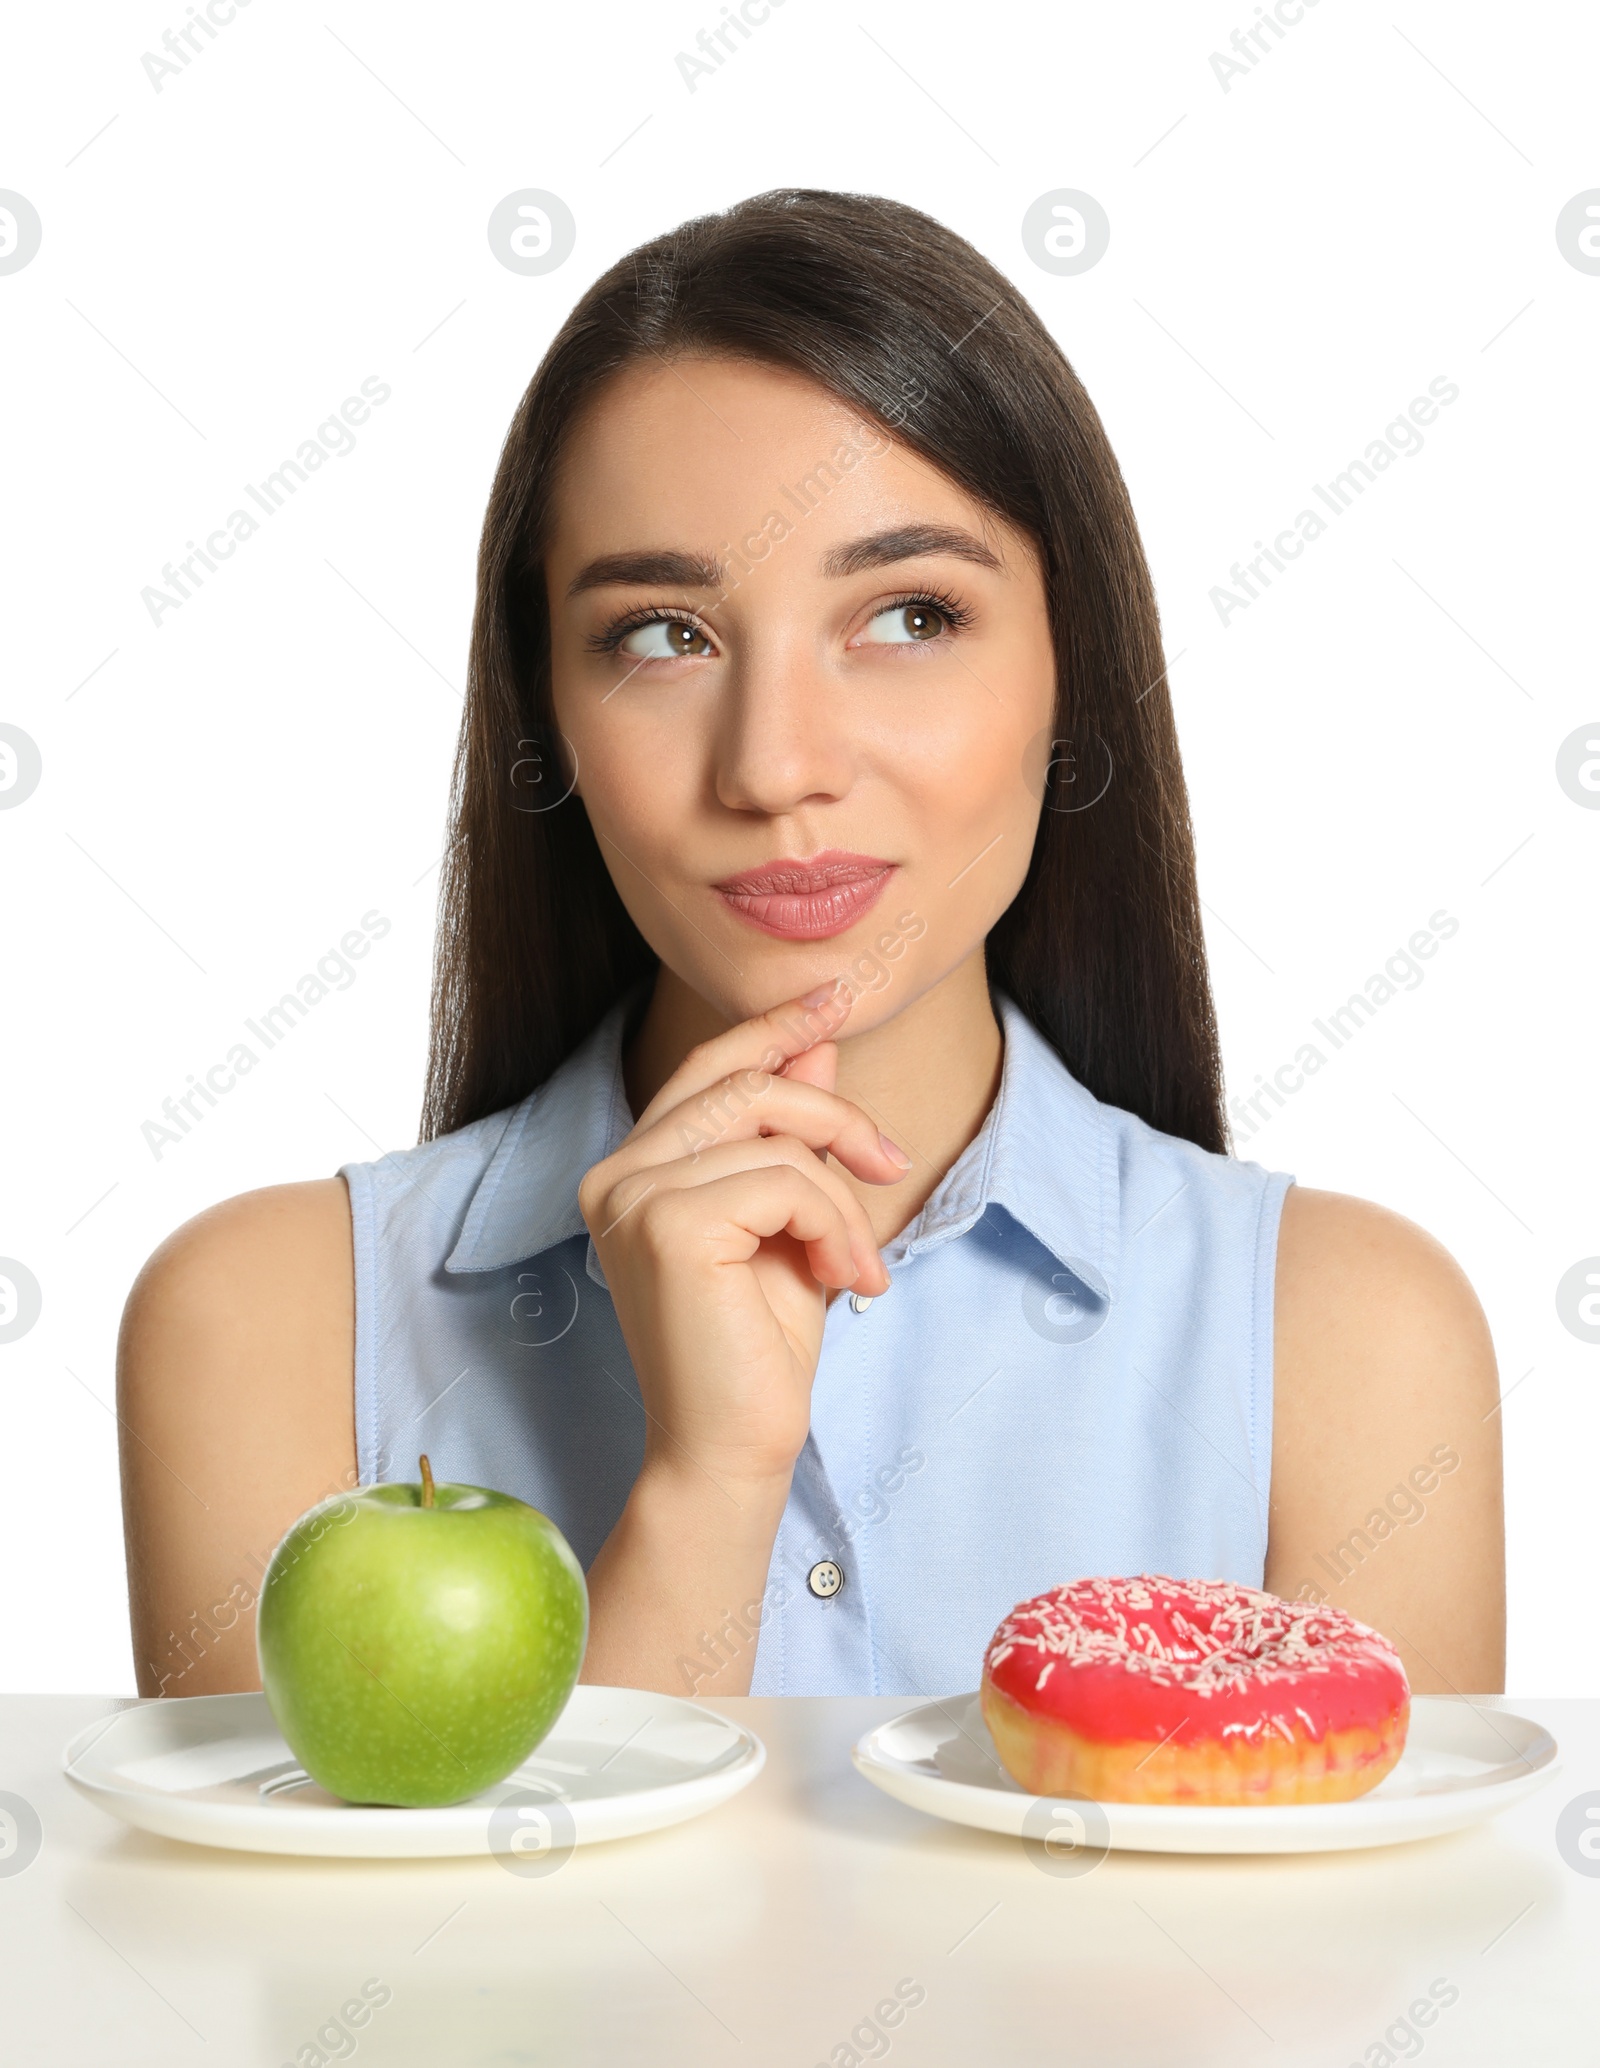 Photo of Doubtful woman choosing between apple and doughnut at table on white background